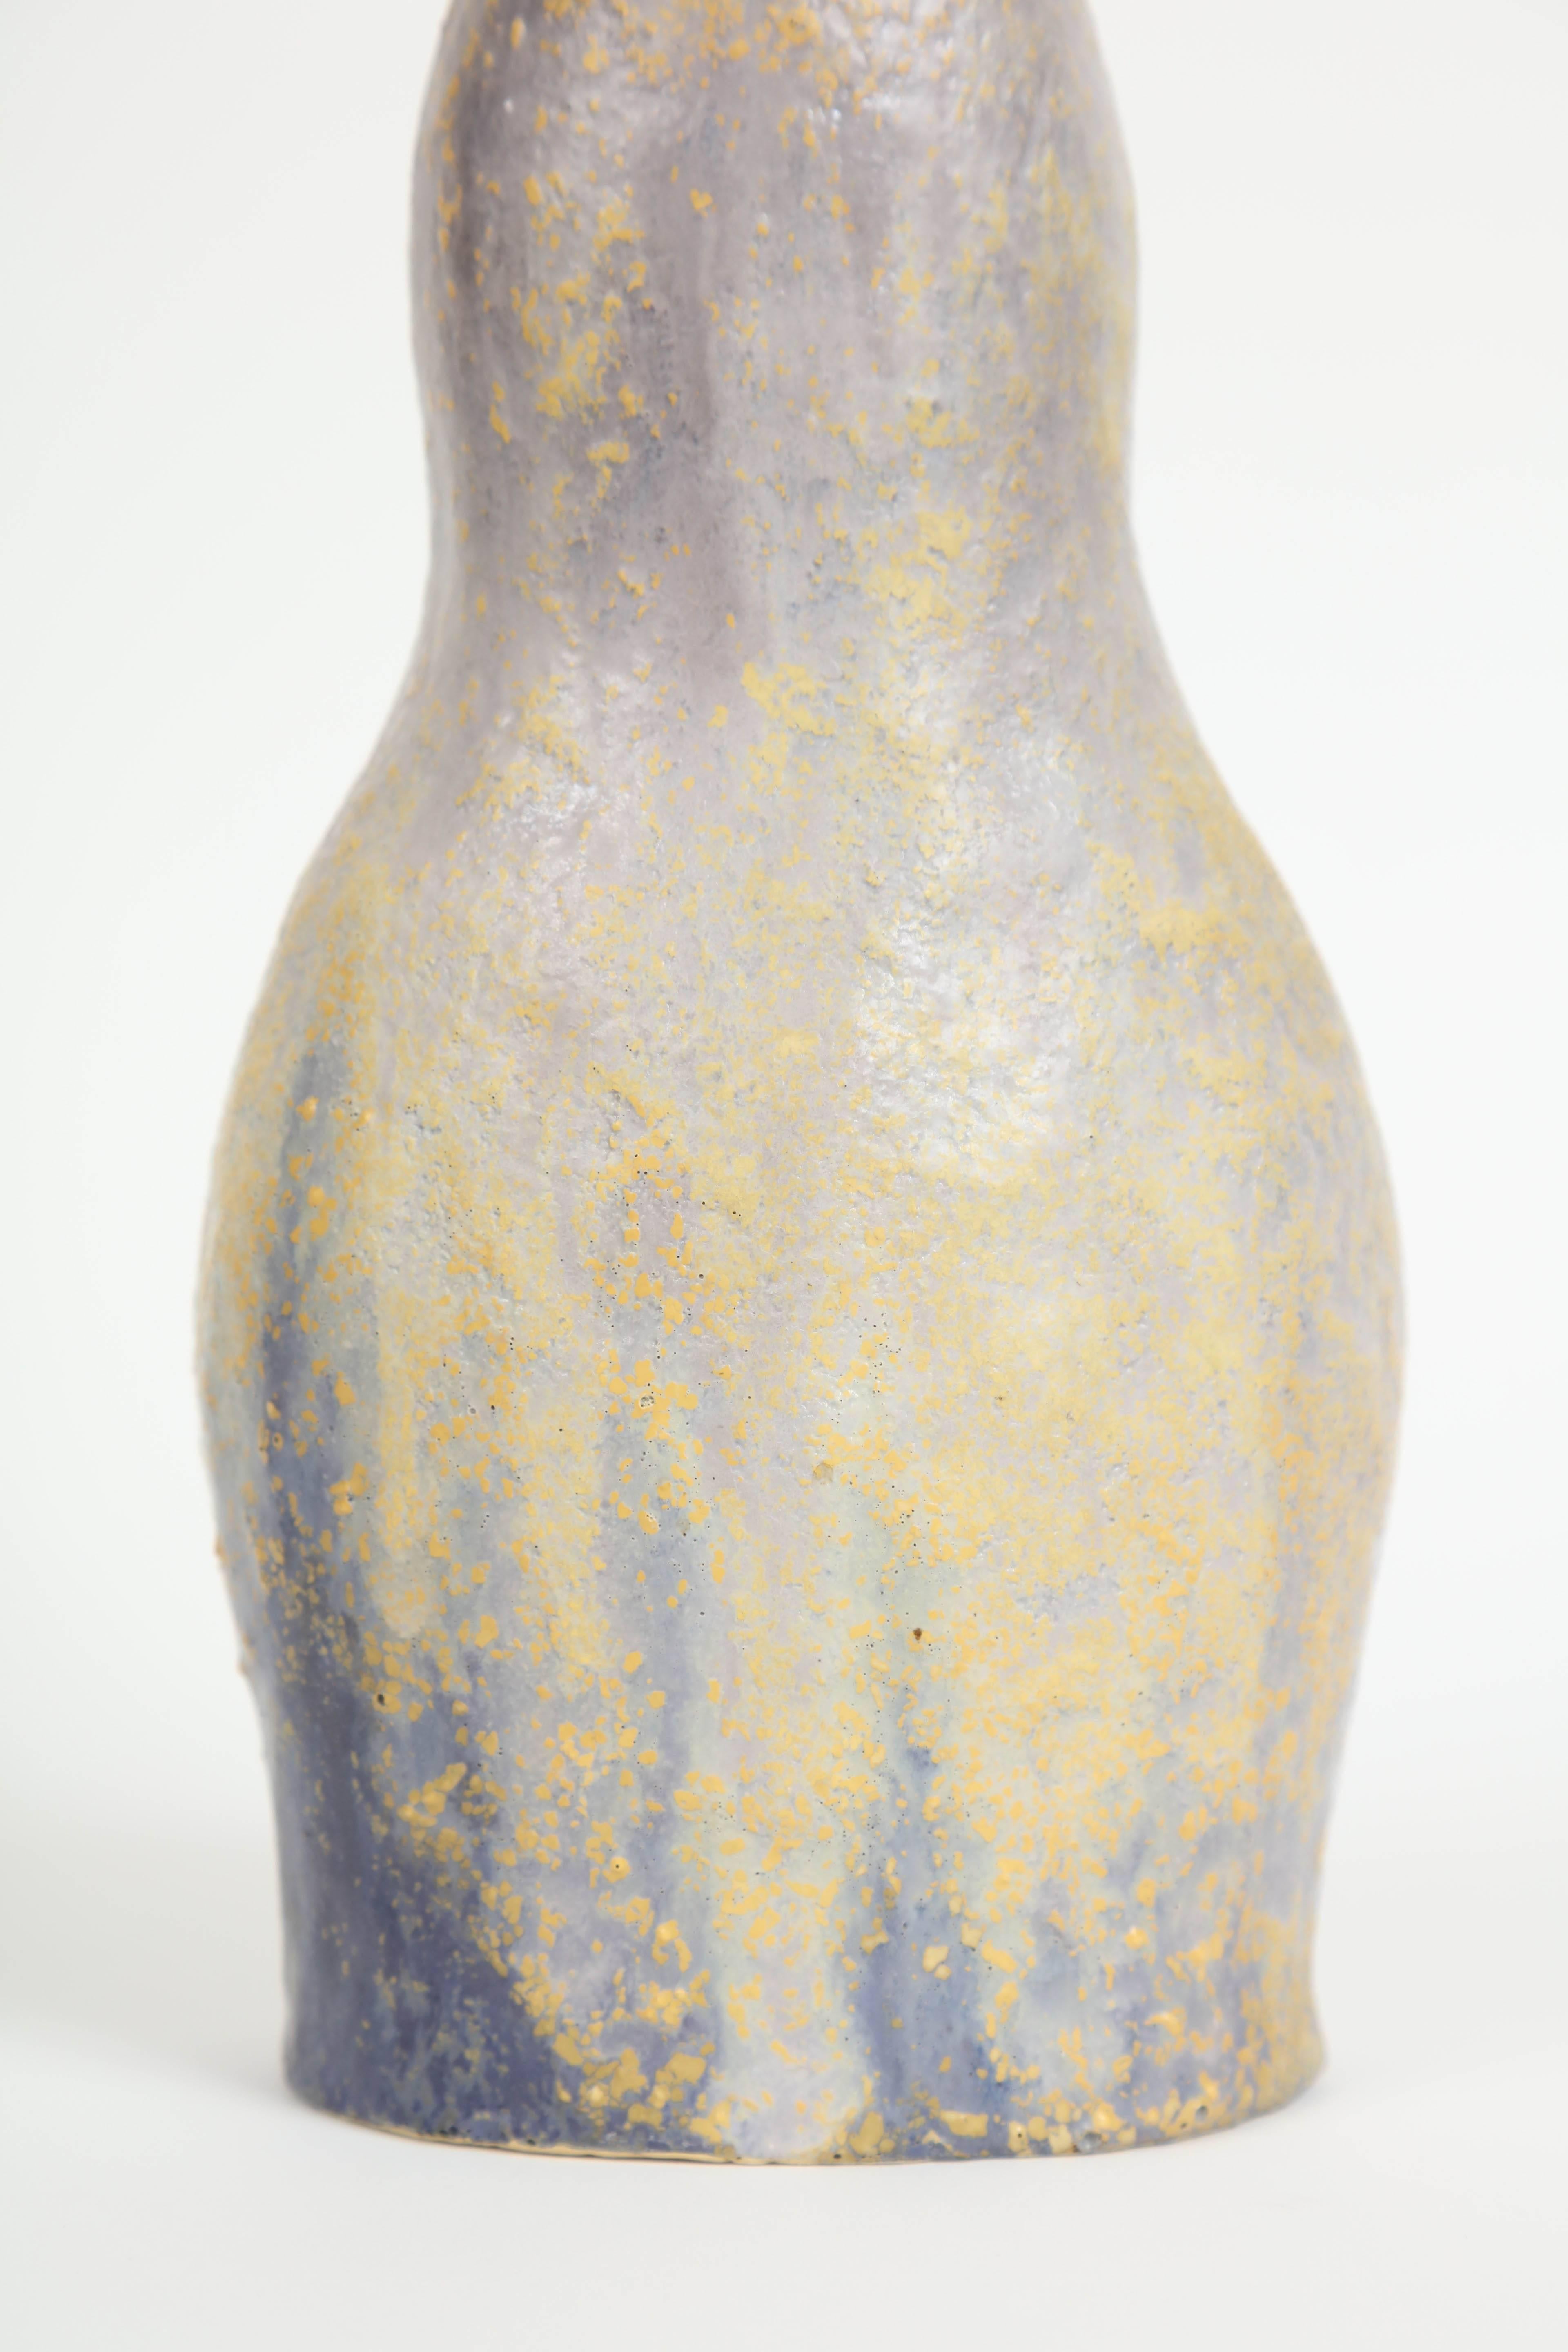 Italian artist Marcello Fantoni ceramic bottle vase is glazed stoneware made circa 1970s. This piece was acquired directly from the artist by the seller, who was a personal friend of Marcello Fantoni. Glazed signature to underside: [Fantoni].

Image